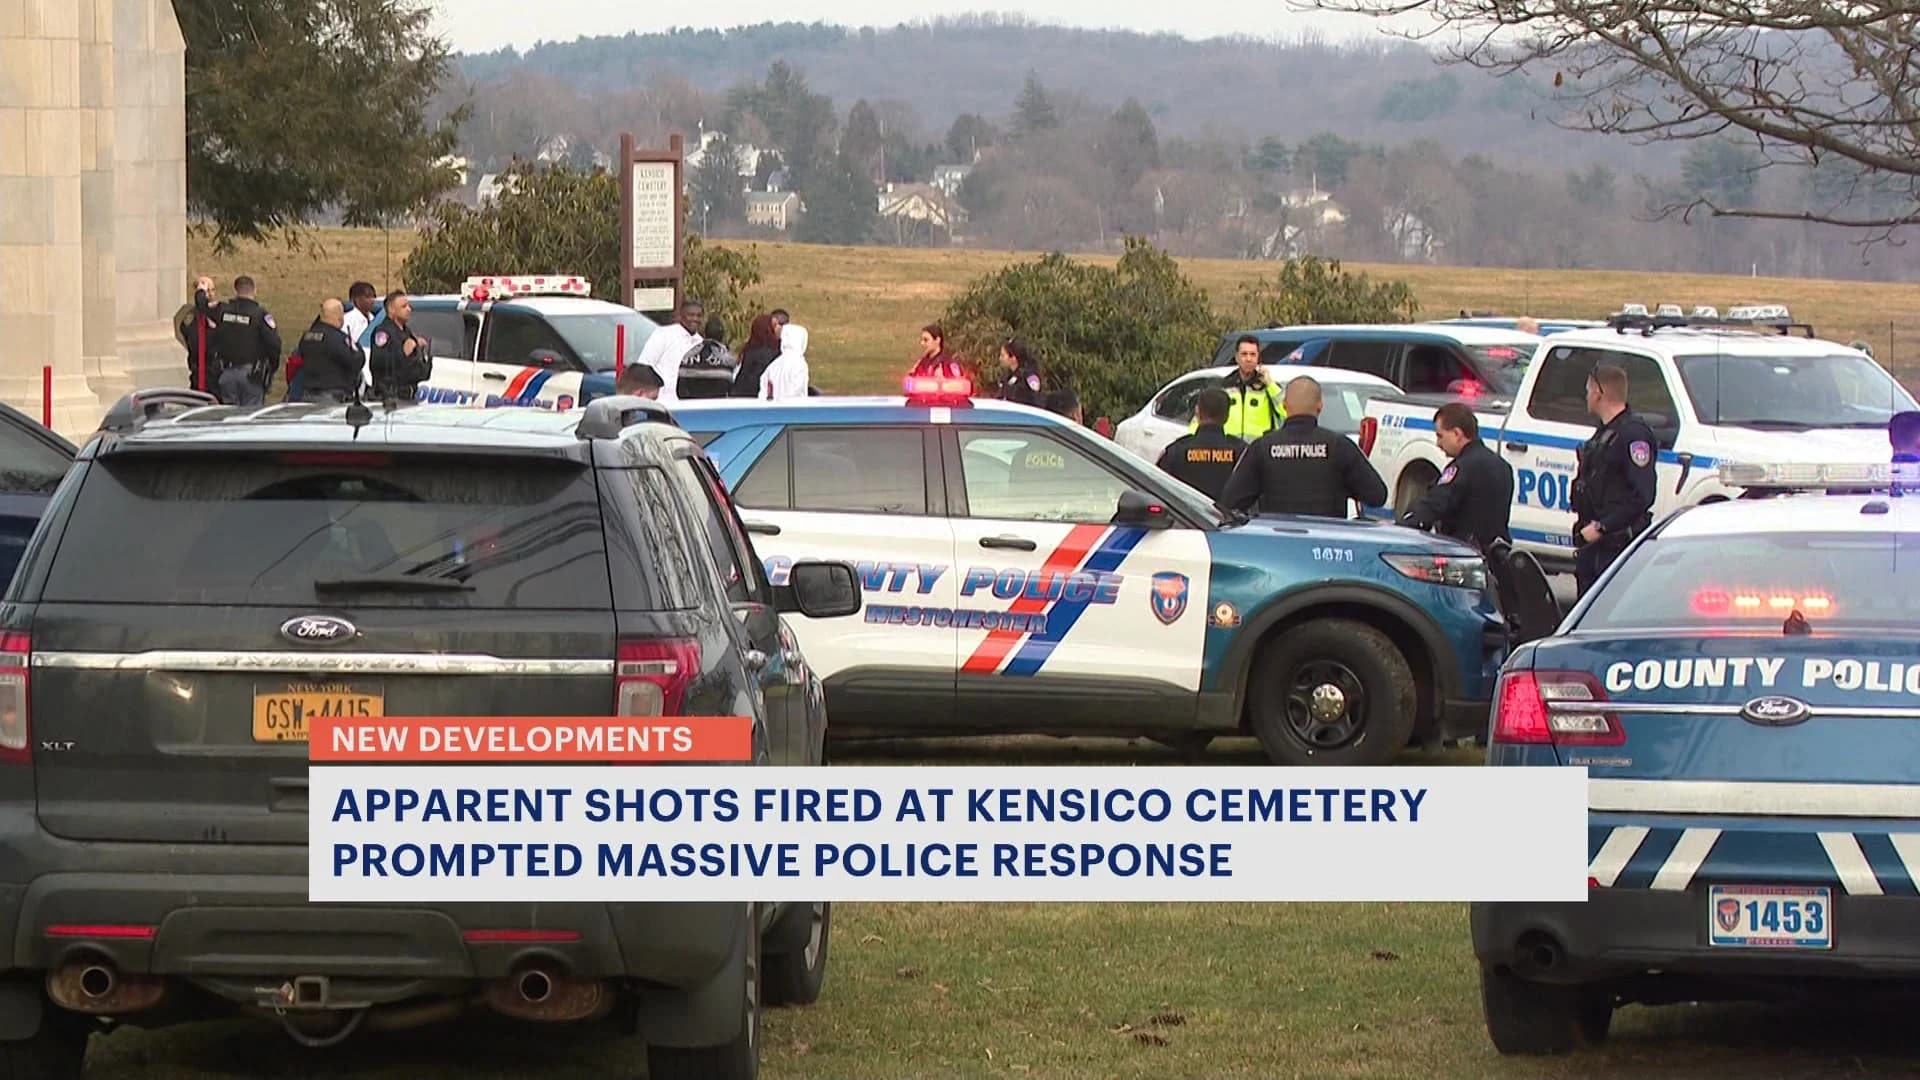 Apparent shots fired at Kensico Cemetery prompted massive police response